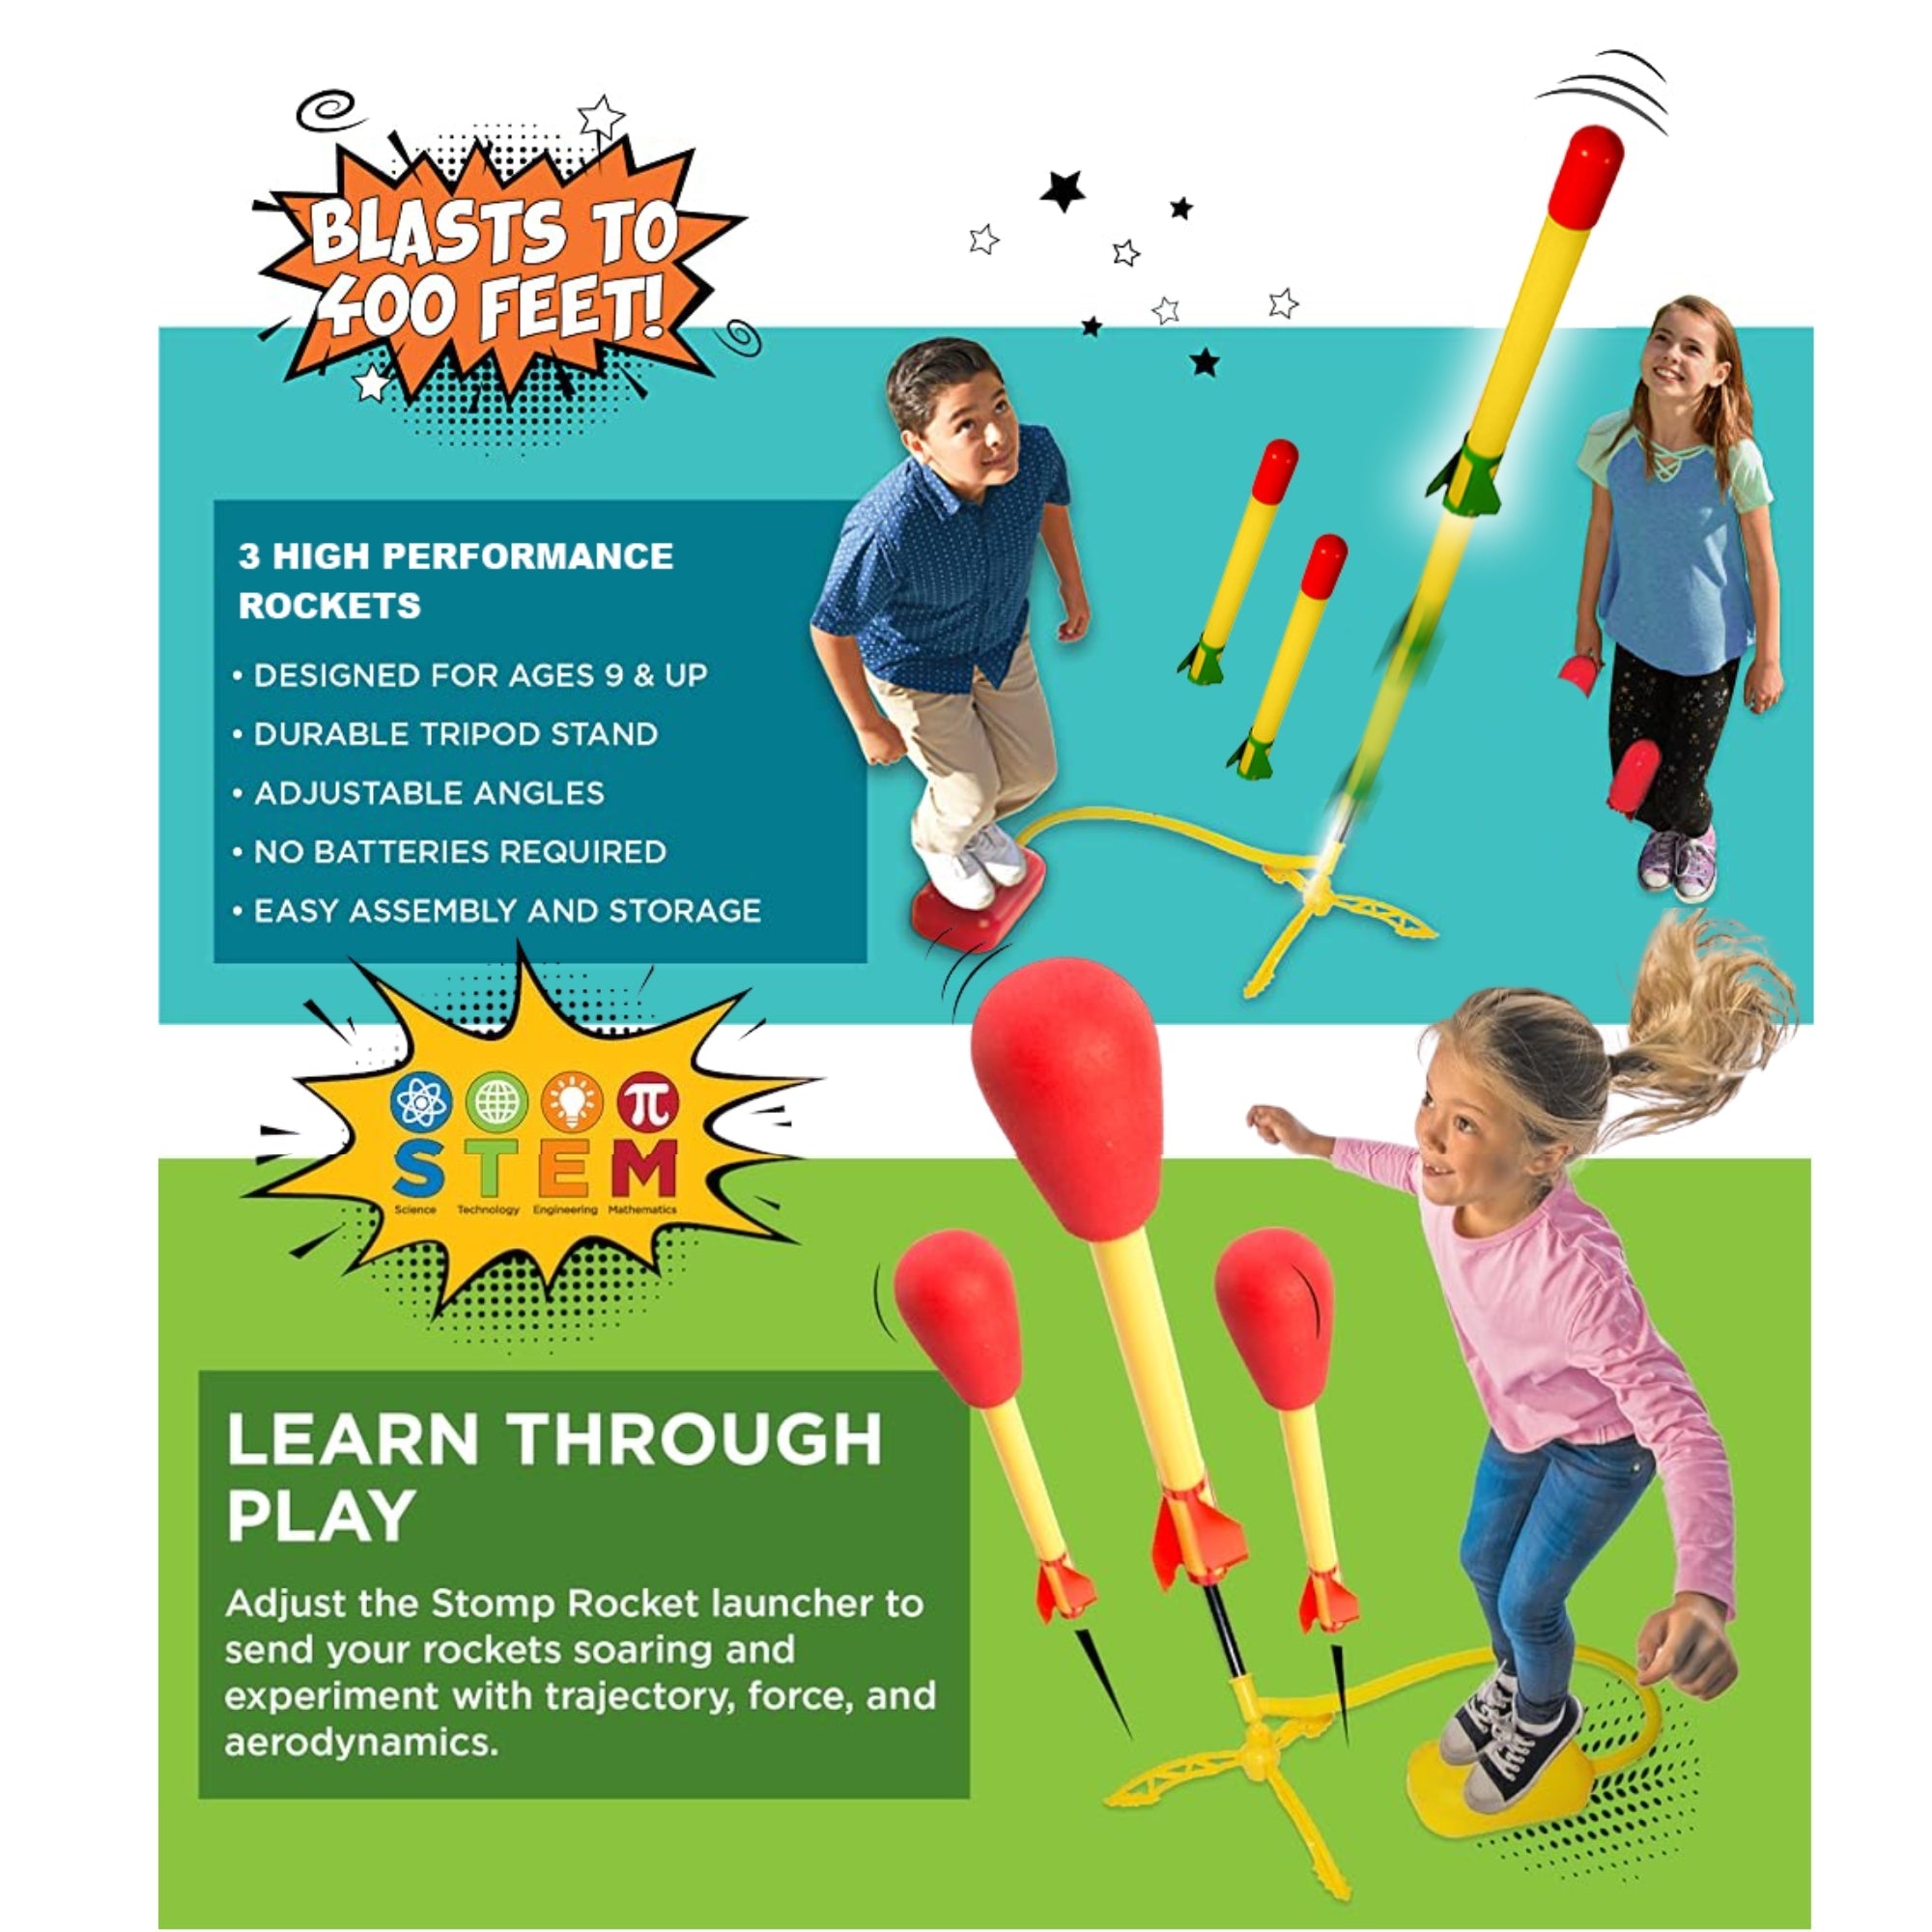 stomp rocket information and benefits